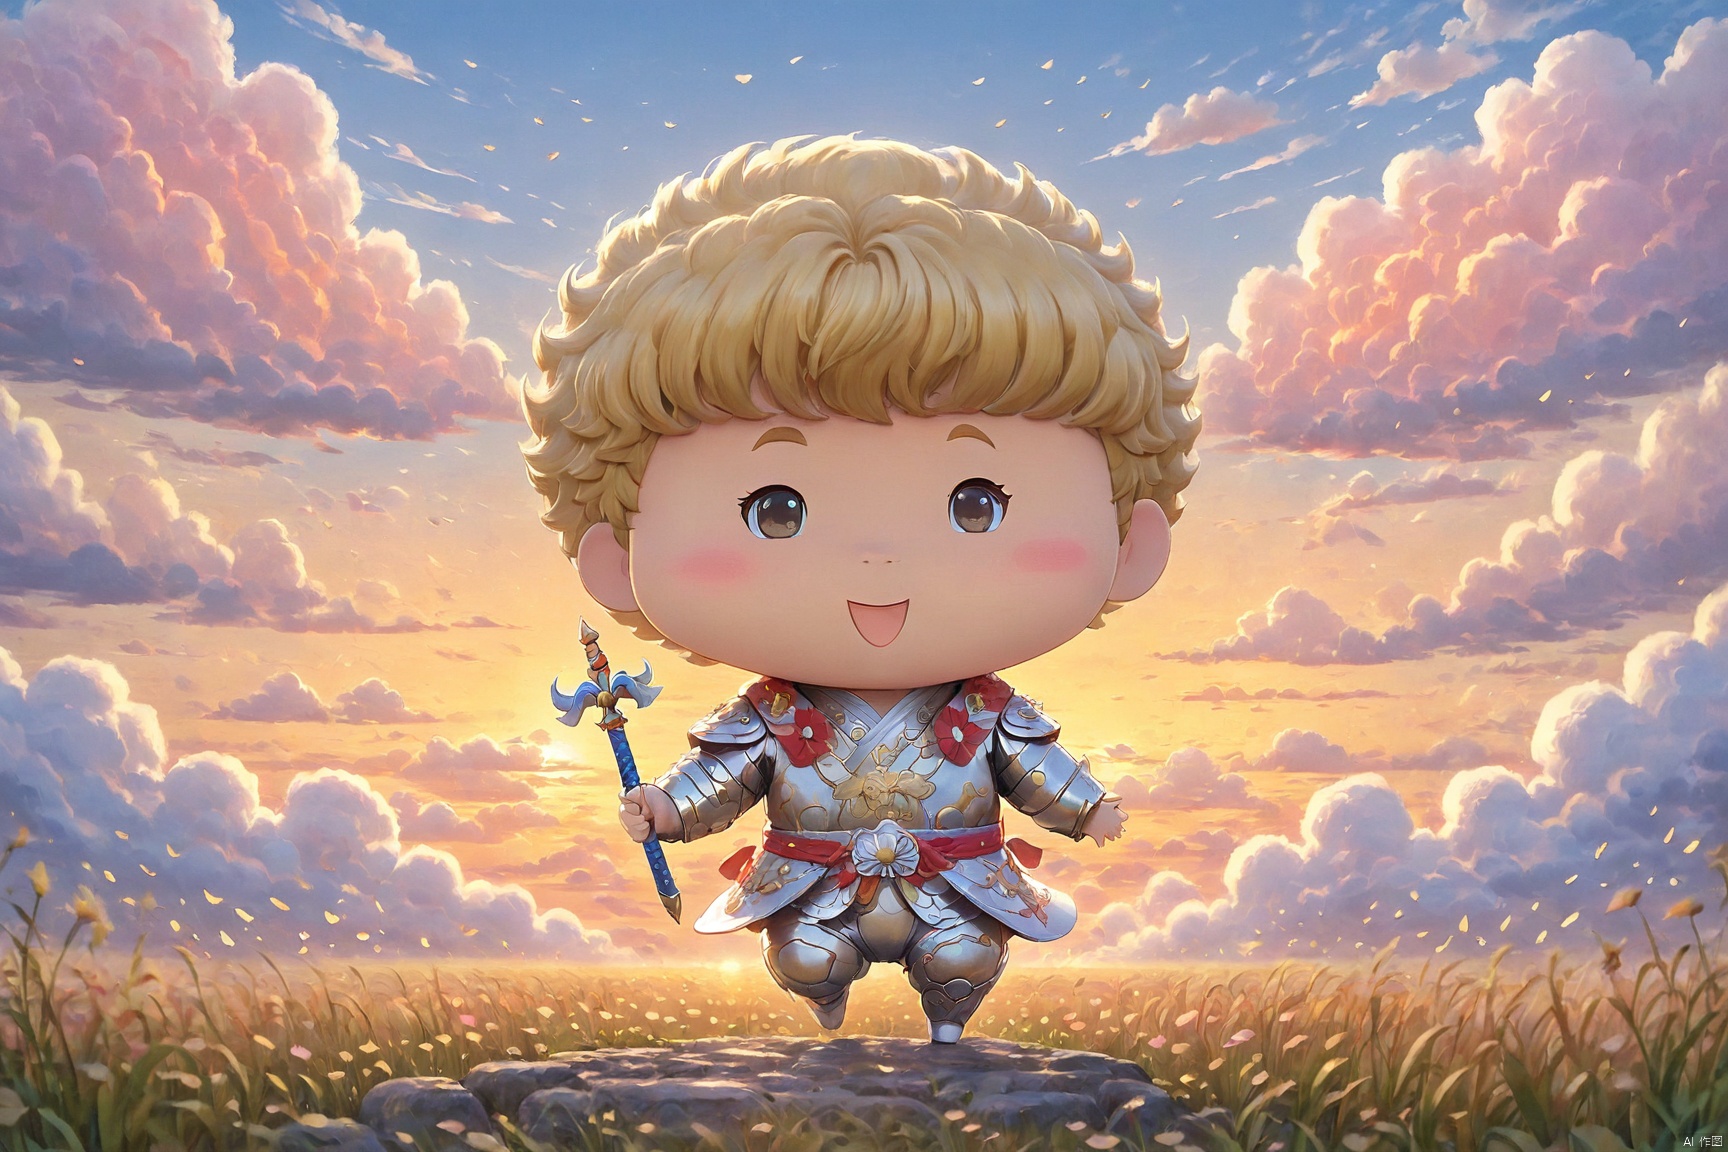 Panorama view,a cute baby, dressed in armor and holding a sword, rides on a elephant on the African savannah. Lions, tigers, and cheetahs bow down before him. The oil painting style and the art style of Hayao Miyazaki give the image a unique touch.